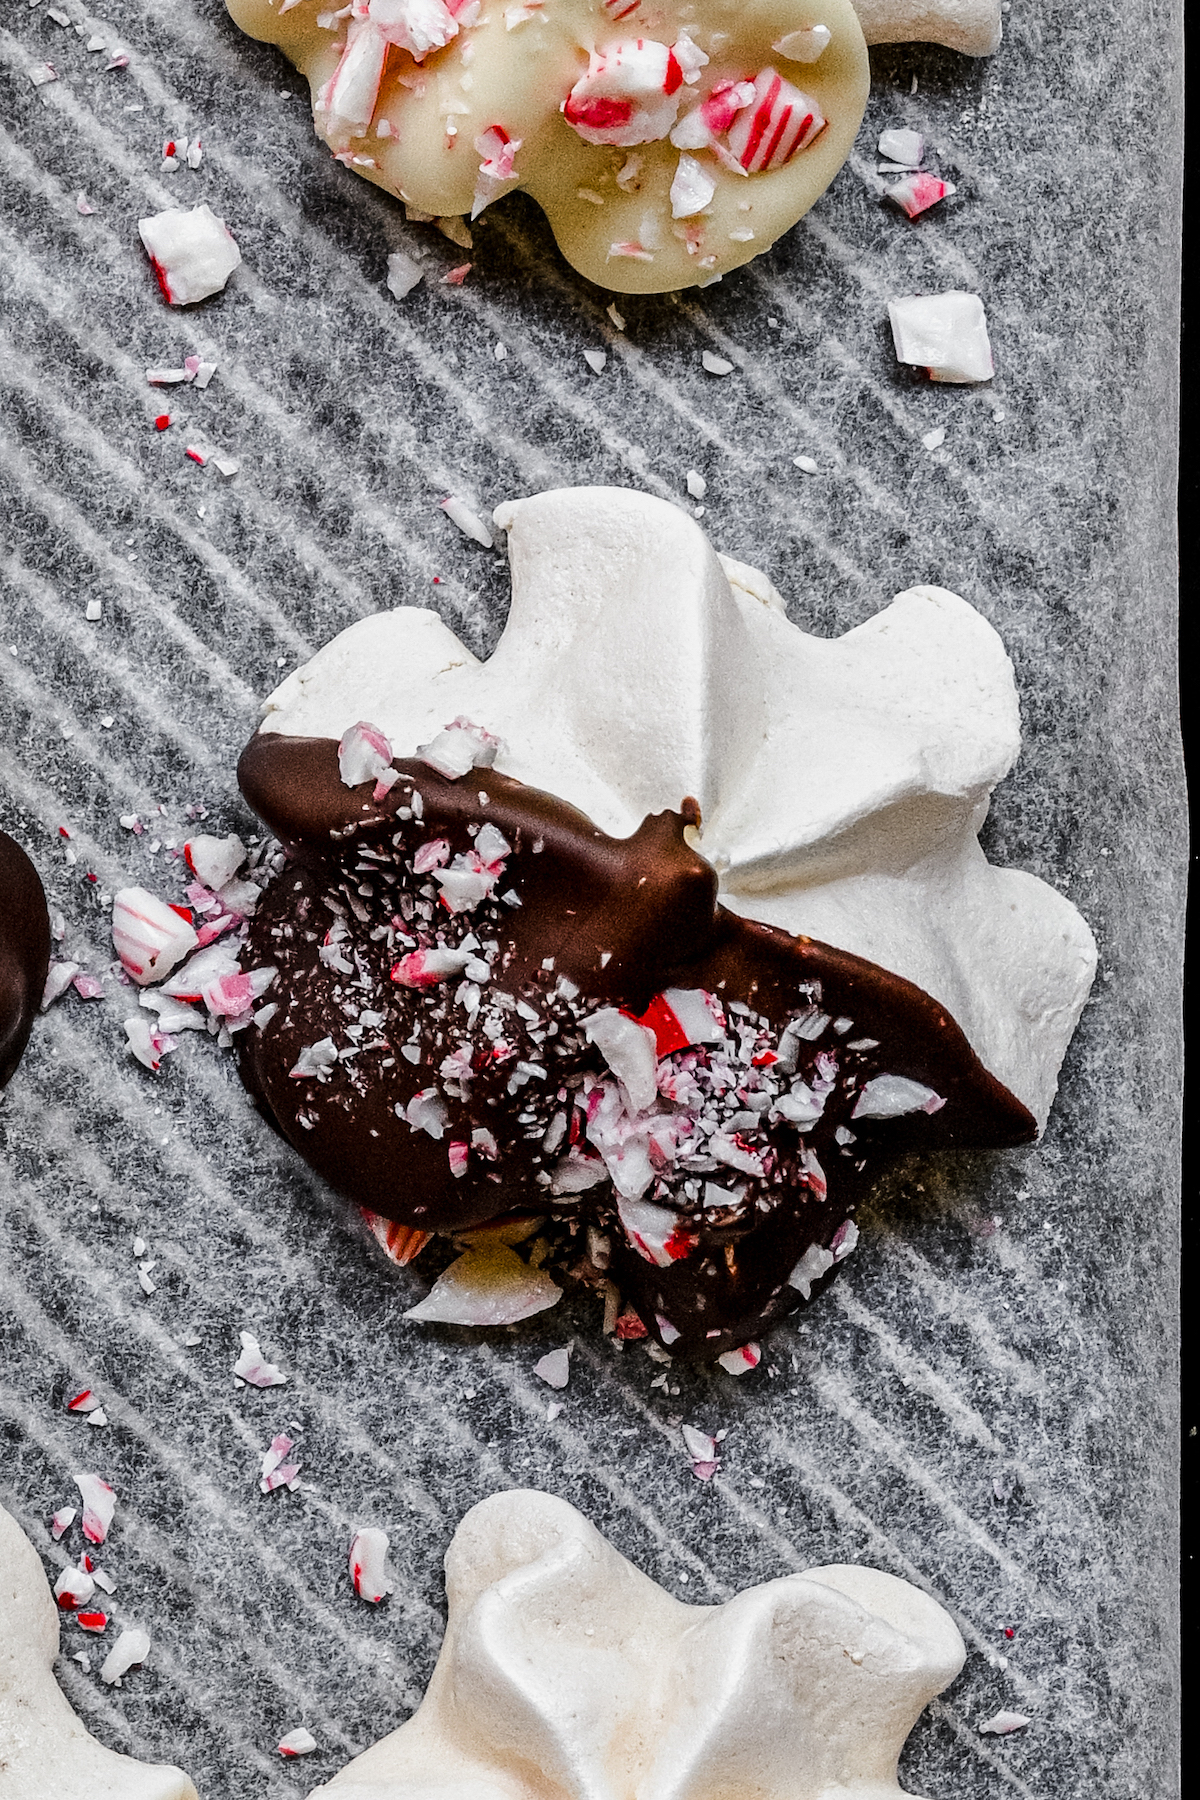 A chocolate-dipped meringue cookie decorated with crushed candy canes.